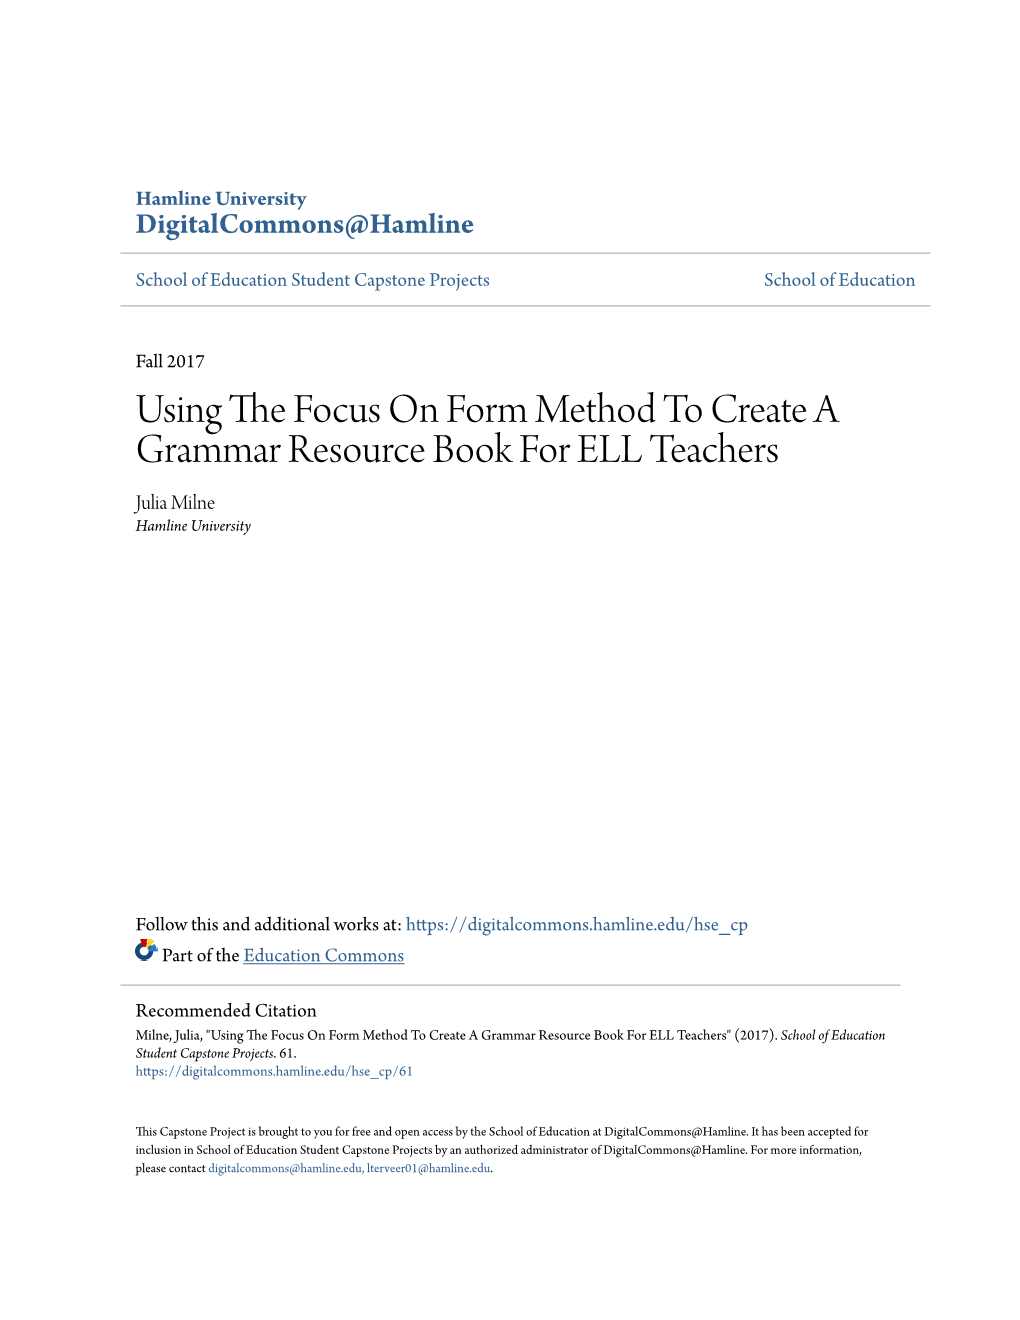 Using the Focus on Form Method to Create a Grammar Resource Book for ELL Teachers